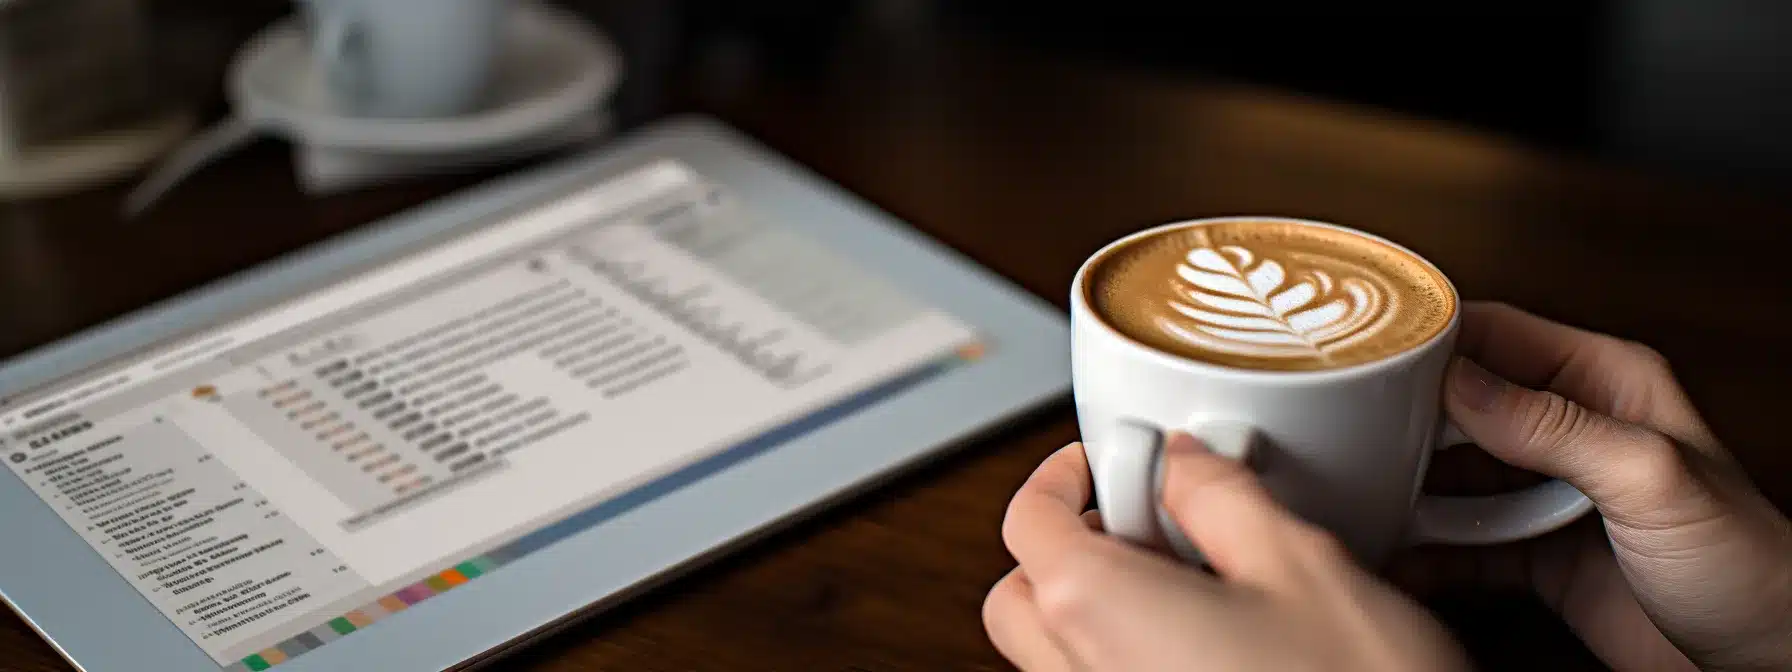 A Person Holding A Cup Of Cappuccino With A Social Media Feed And Swot Analysis Charts In The Background.